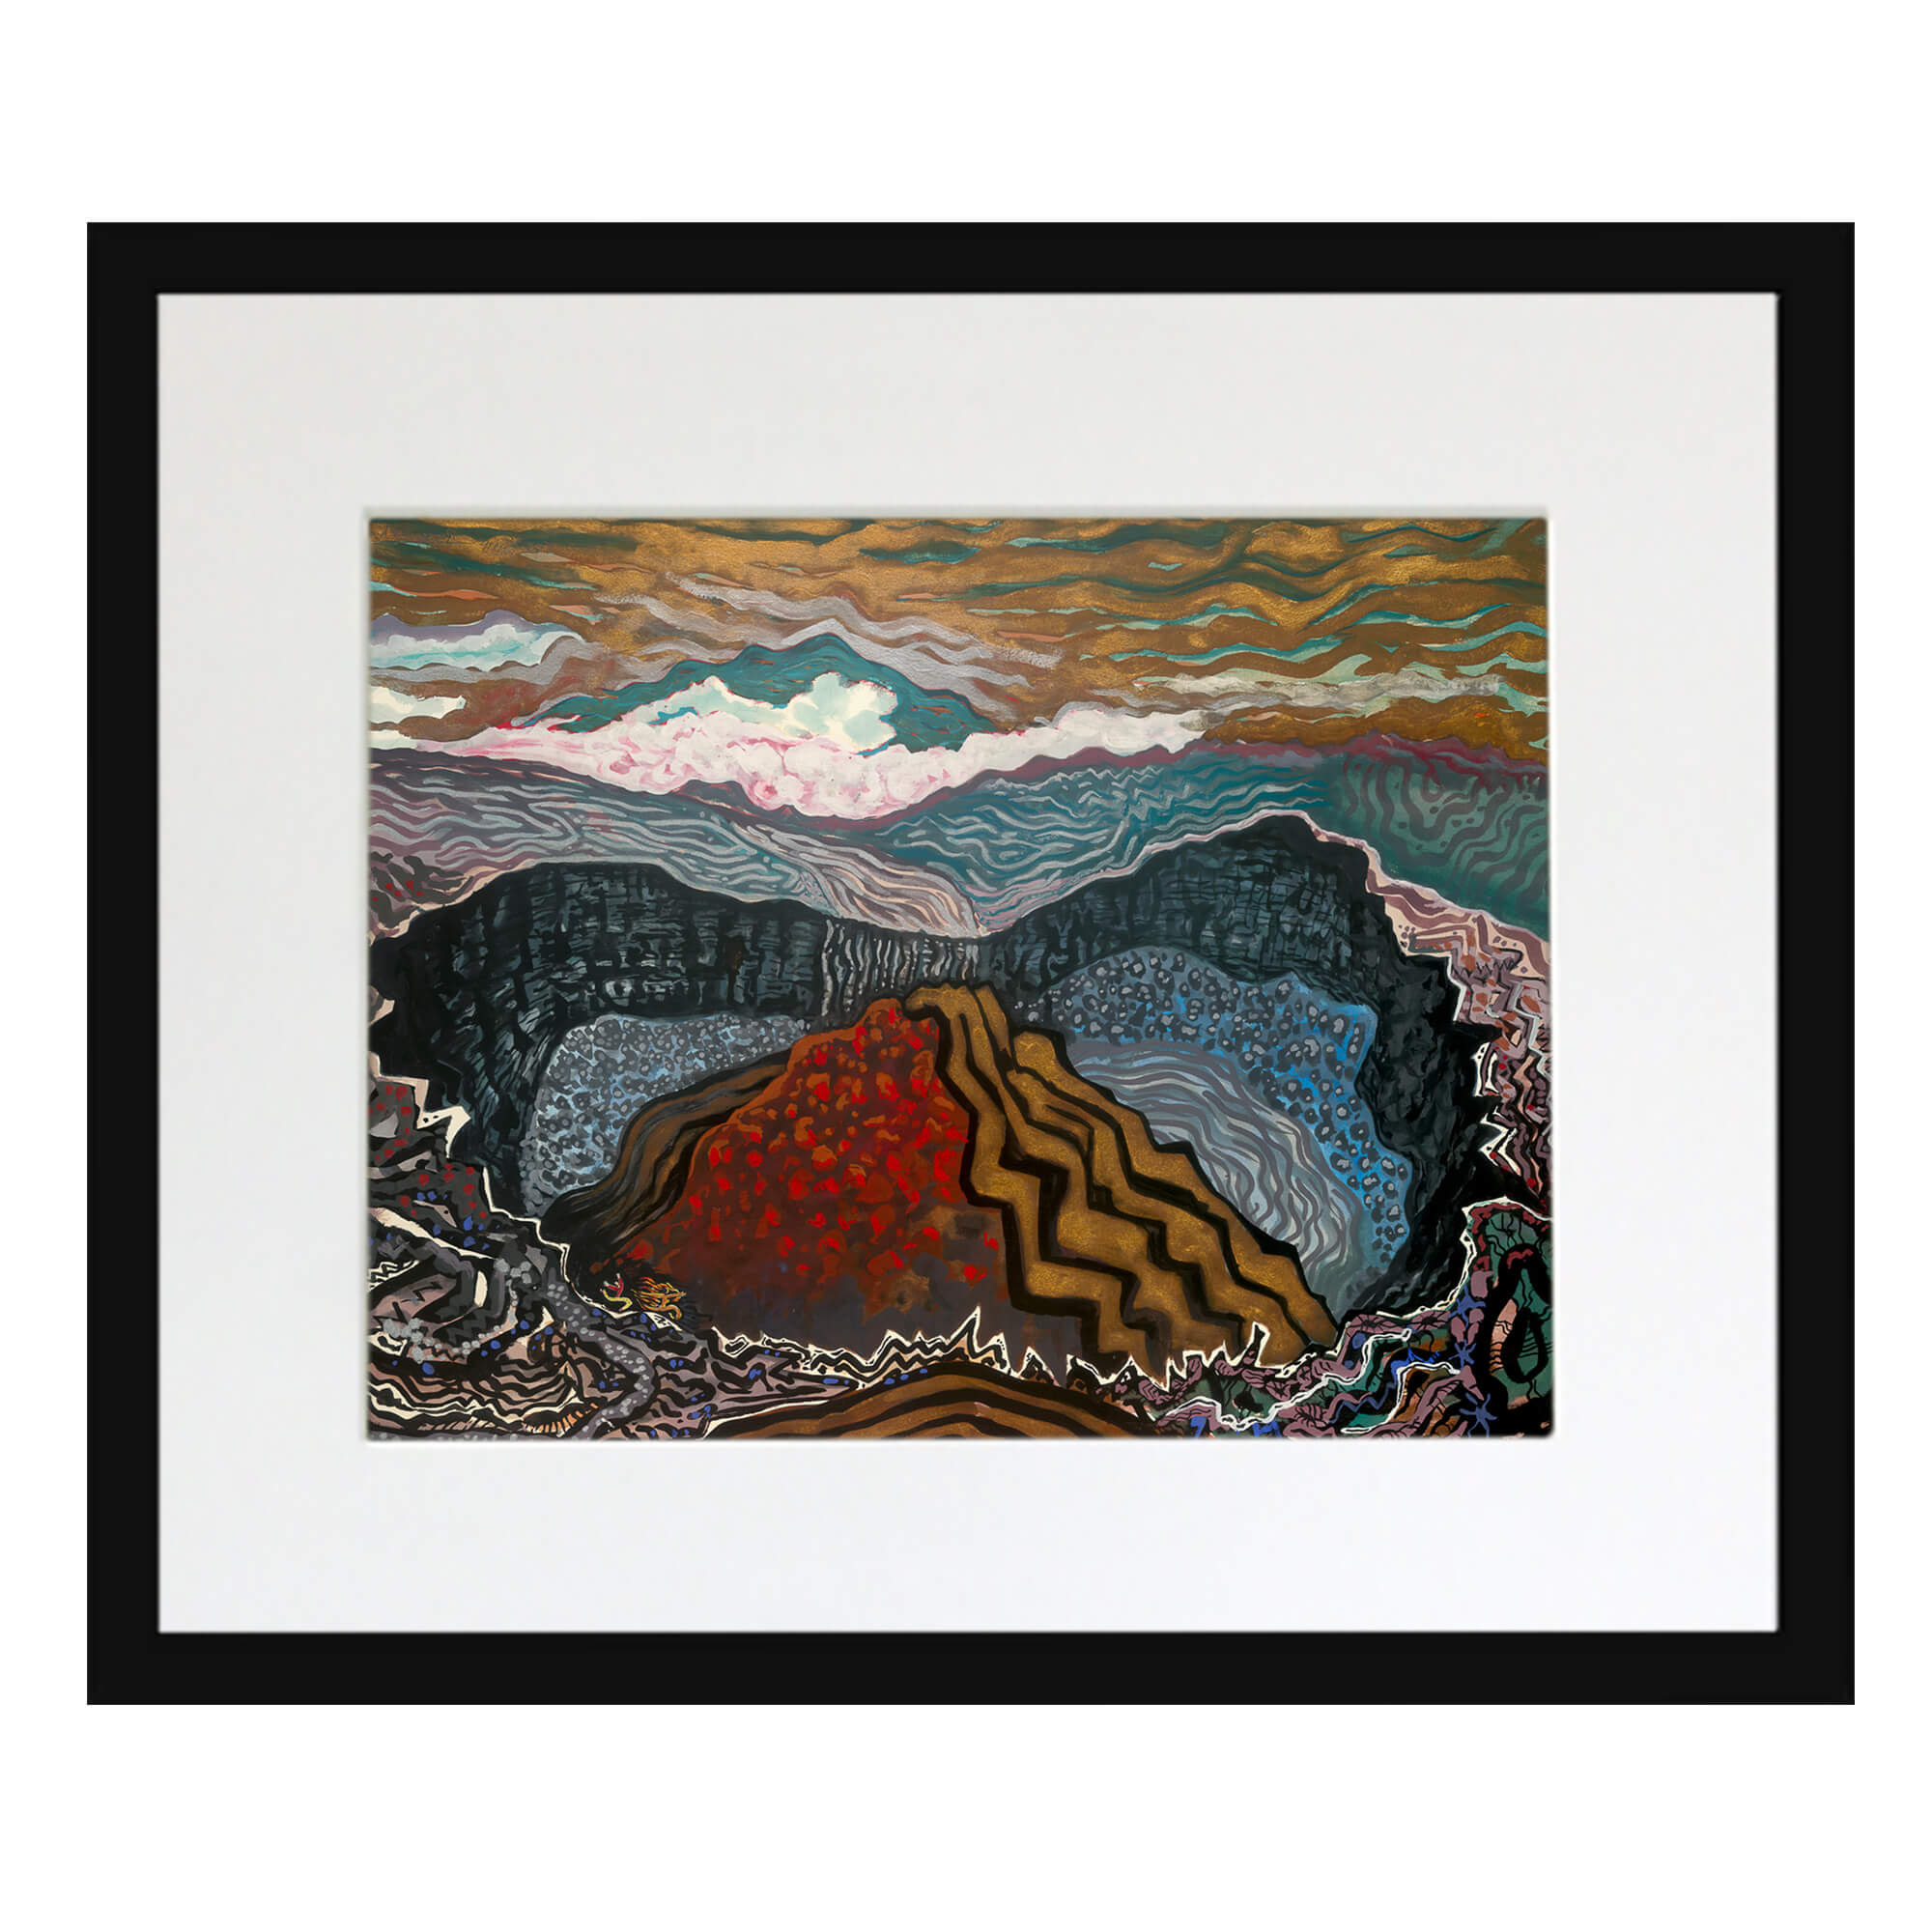 Matted art print with black frame featuring  different layers of rocks by hawaii artist robert hazzard